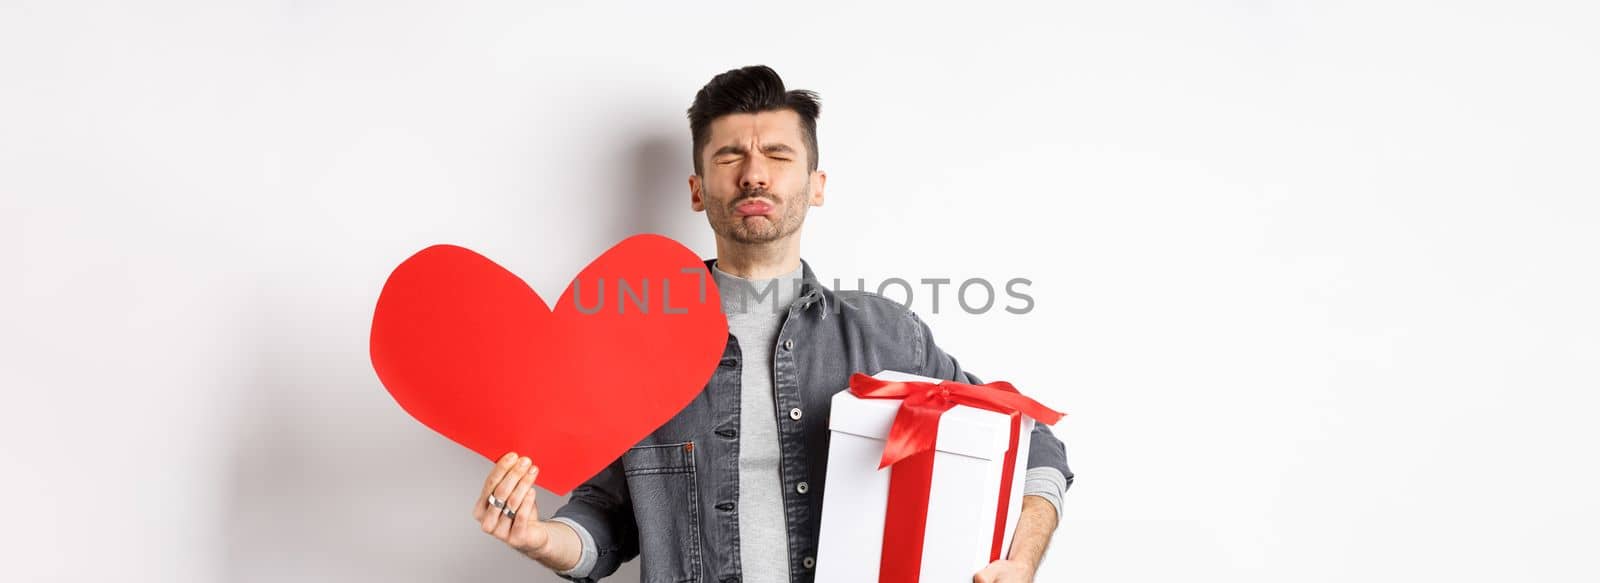 Sad and heartbroken man being rejected, crying and holding red heart with gift box, breakup on Valentines day, white background. Love and relationship concept.